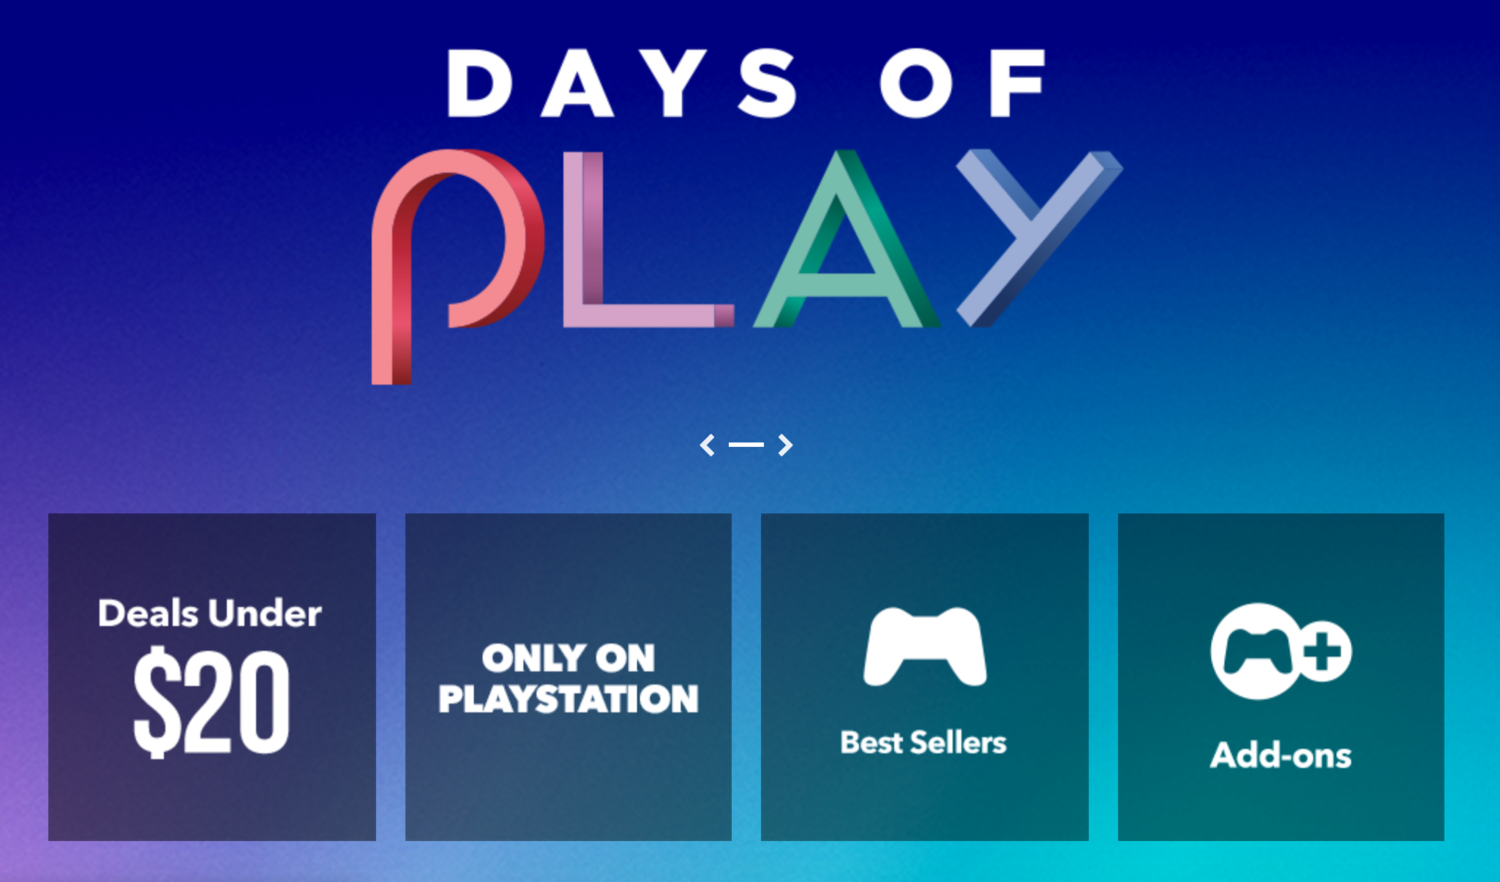 Playstation days. Play Day. PS Store Days of Play обложка в ВК. PLAYSTATION Summer sale. Days of Play 2023.